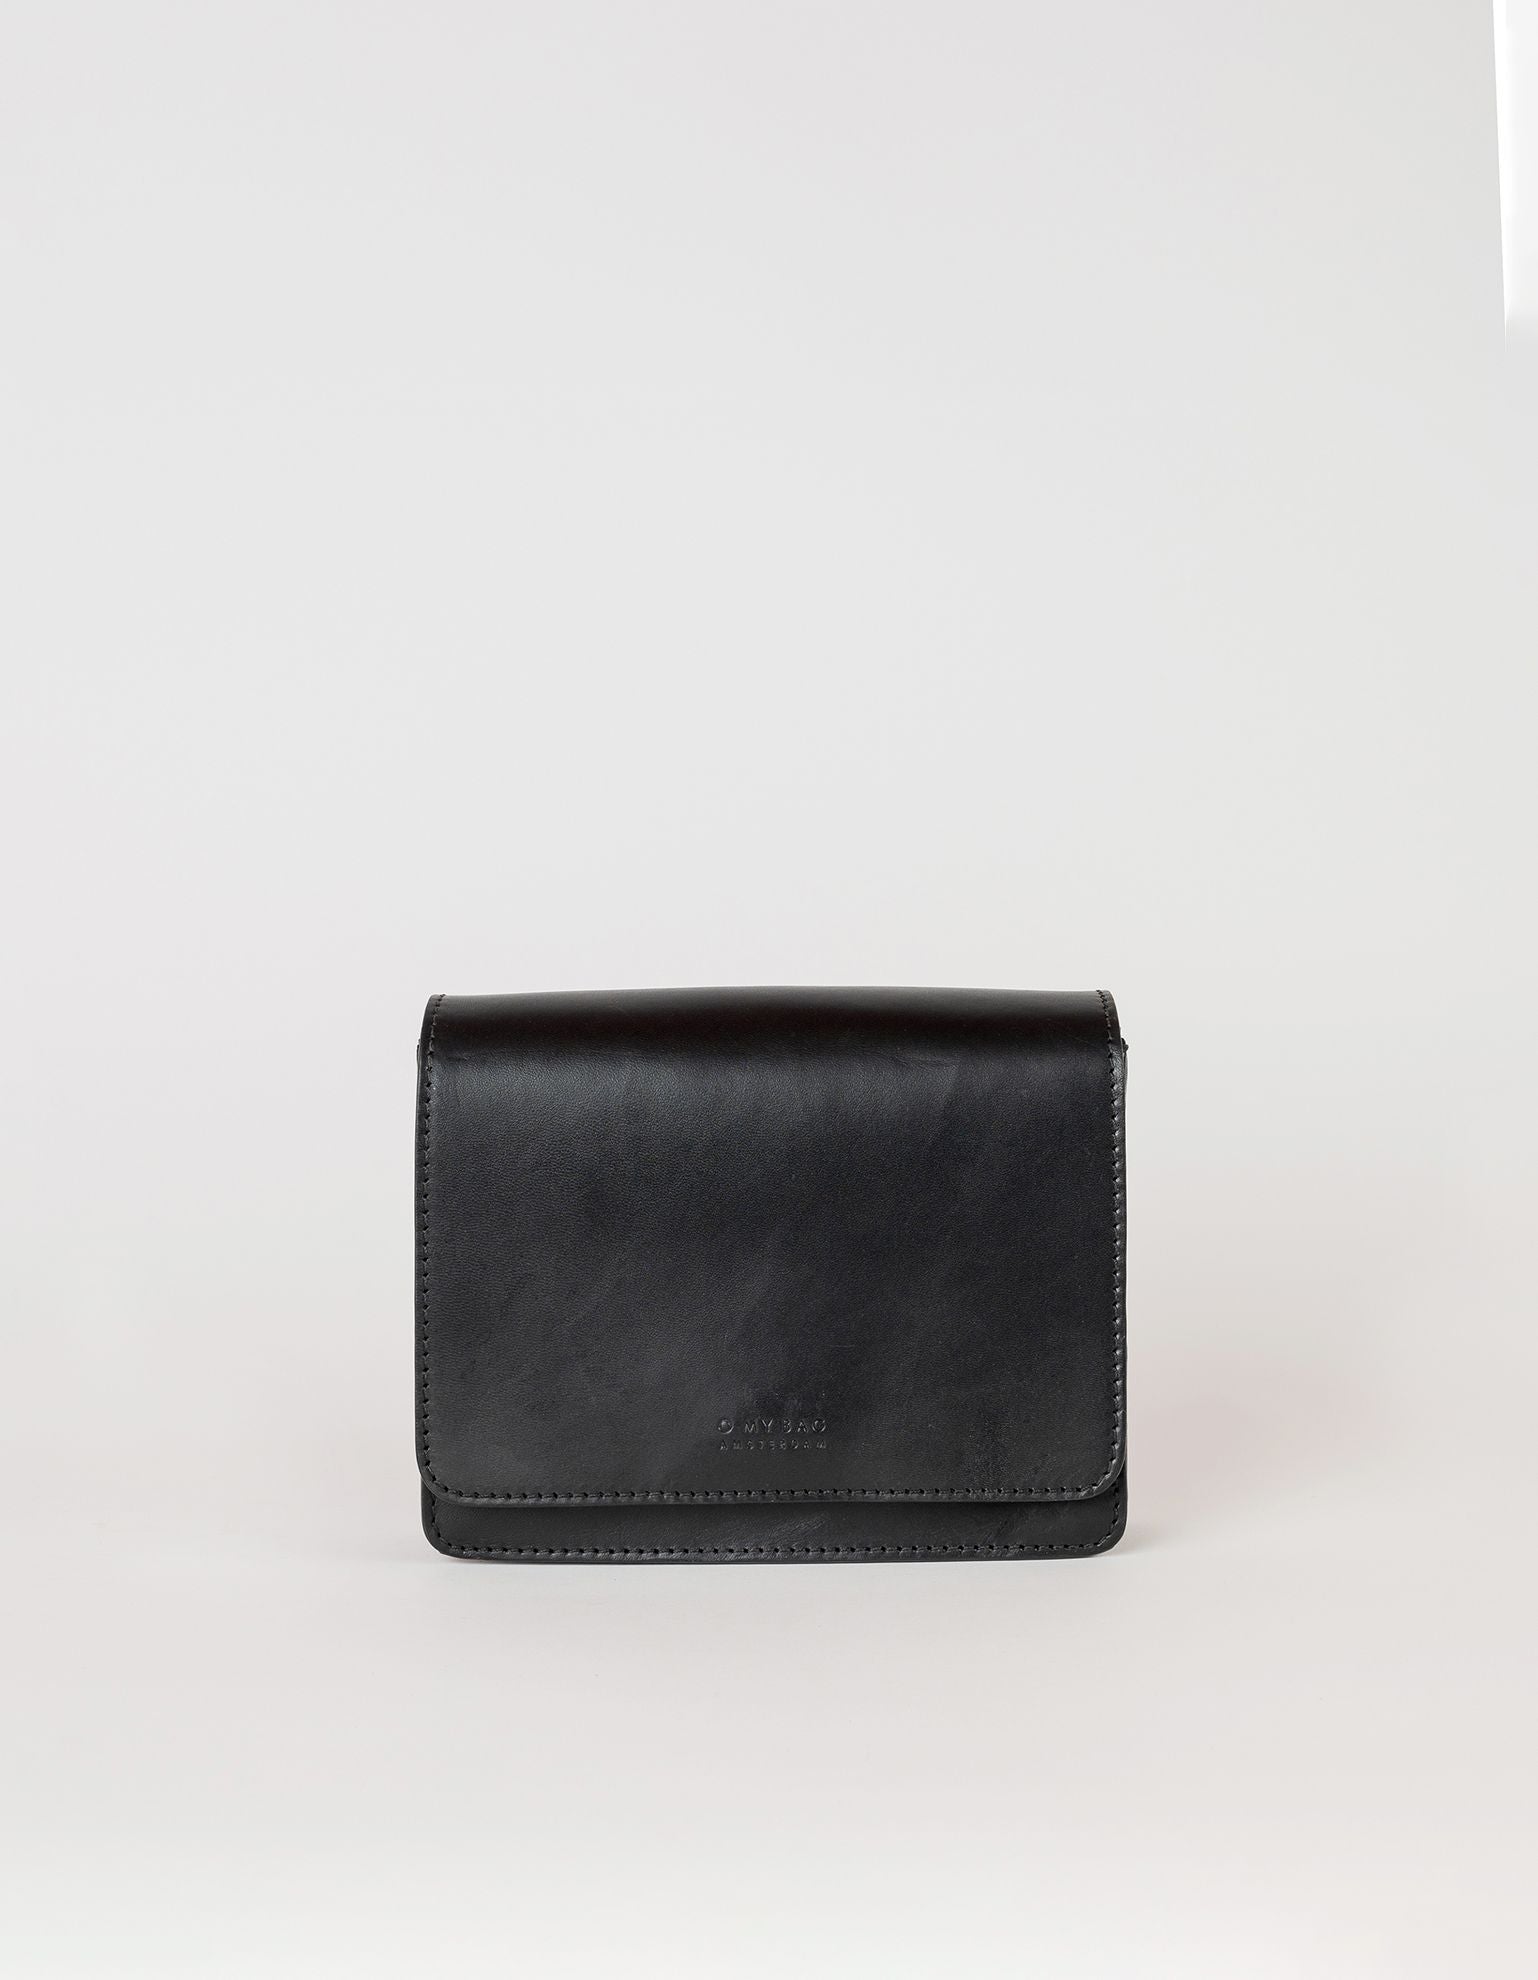 Audrey mini black classic leather bag. Front product image. Without strap.